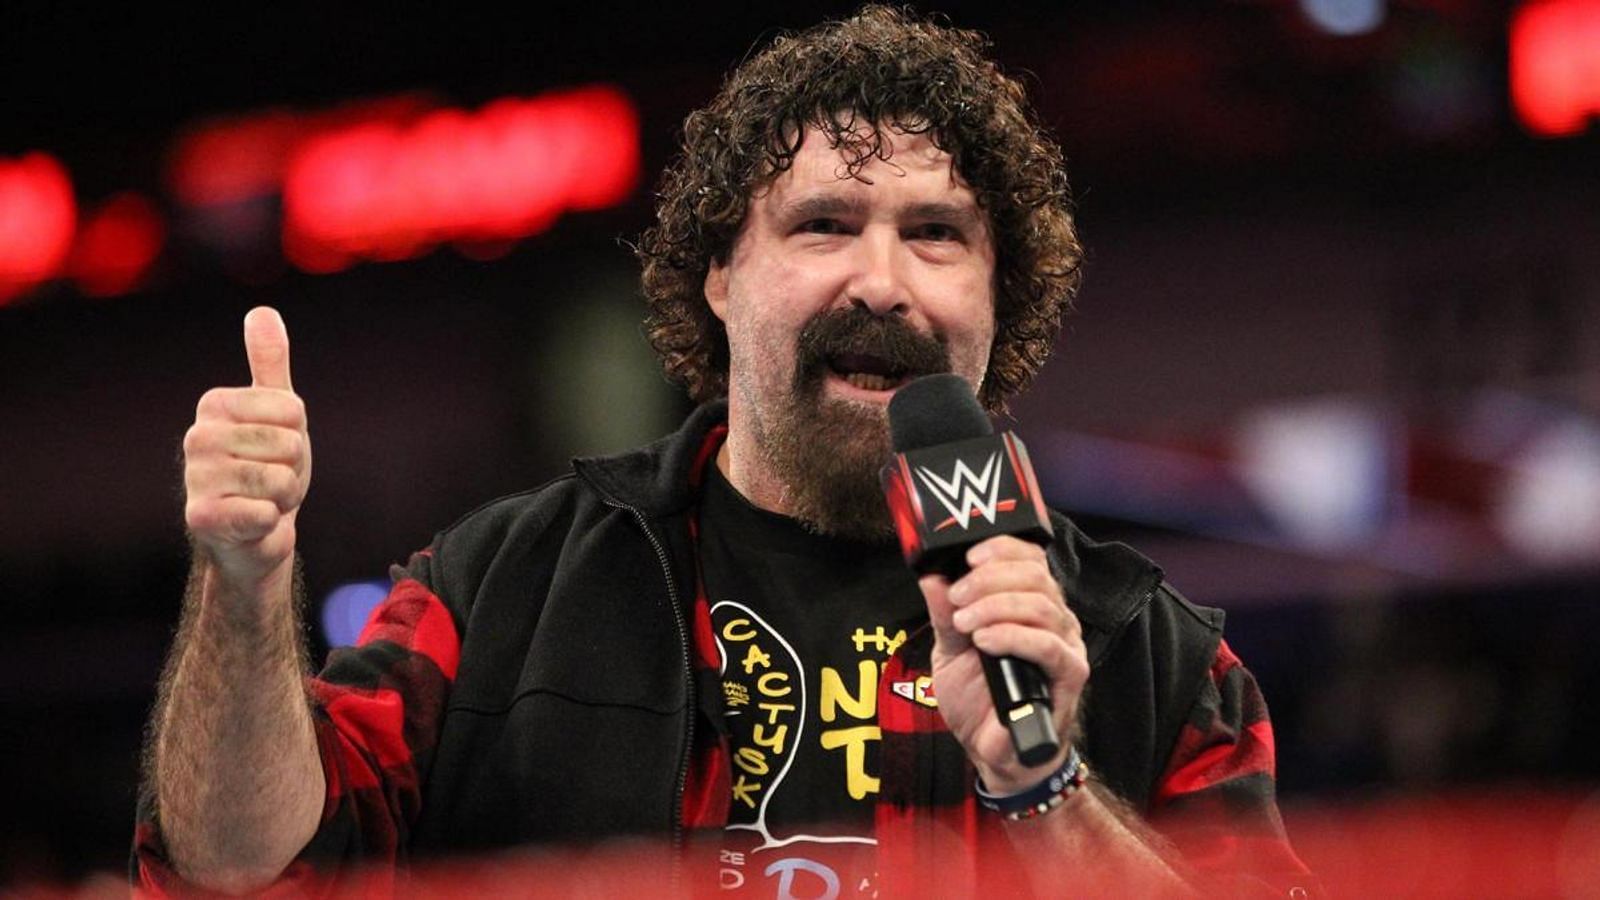 Mick Foley is a big fan of the AEW product